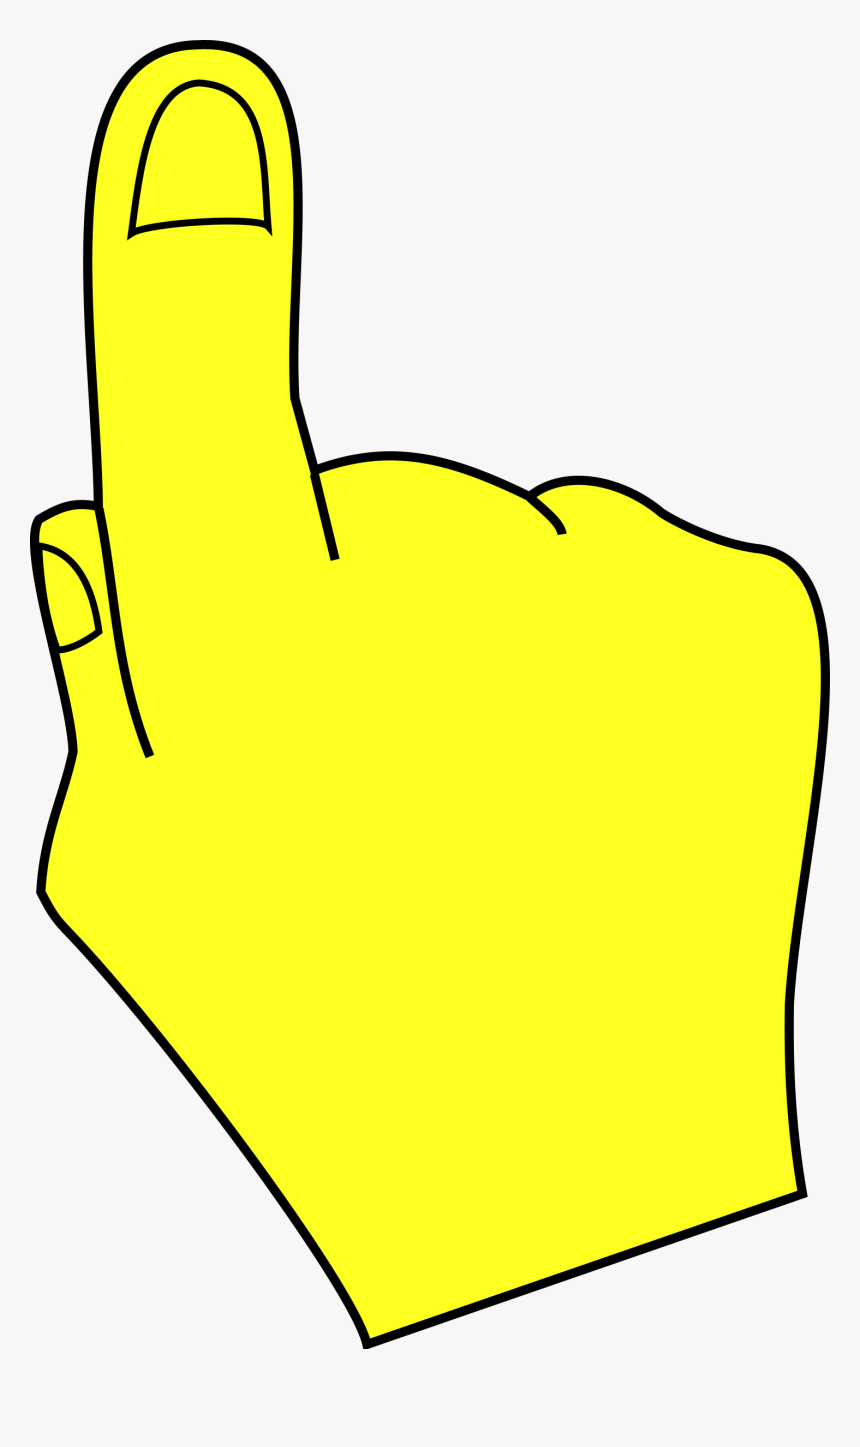 Pointing Hand Clip Art - Yellow Hand Pointing Up, HD Png Download, Free Download